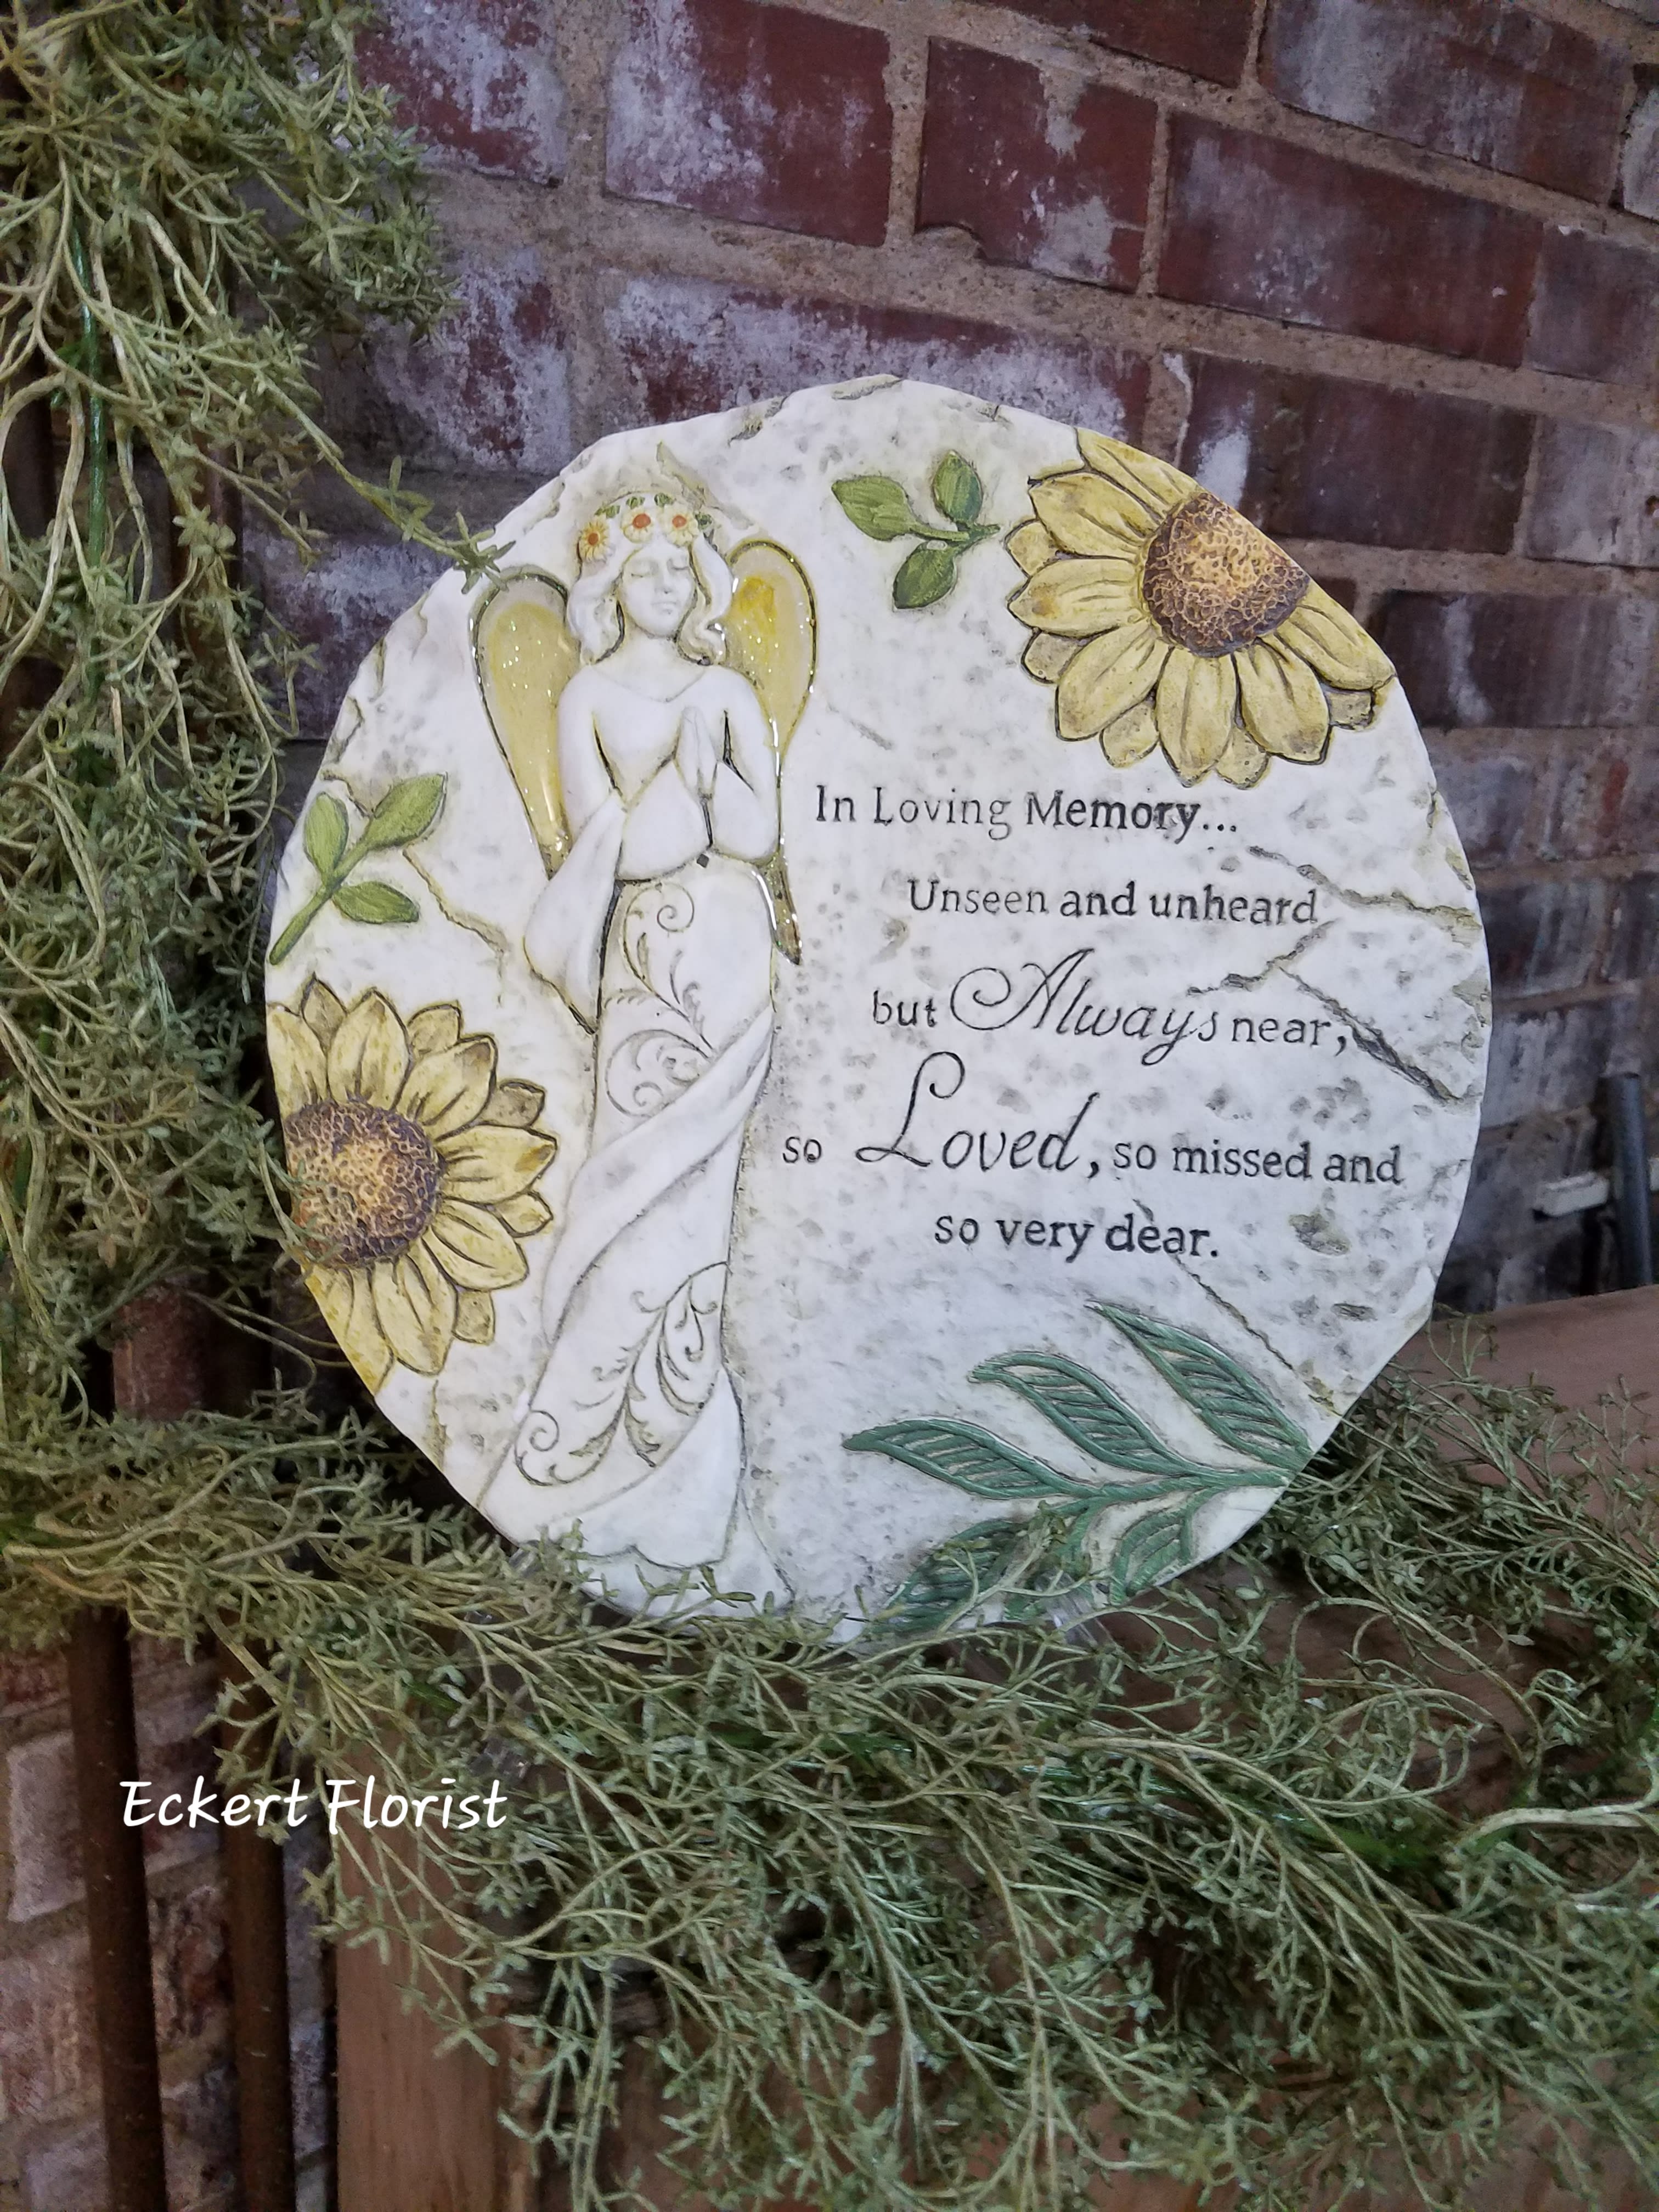 Eckert Florist's In Loving Memory Plaque *LOCAL DELIVERY ONLY - This stone reads ~ &quot;In Loving memory...Unseen and unheard but Always near, so Loved, so missed and so very dear.&quot;  *See Add-on Section for Display Easel Stone can also be added to a fresh arrangement. (See upgrades) Approx. 10&quot; Diameter